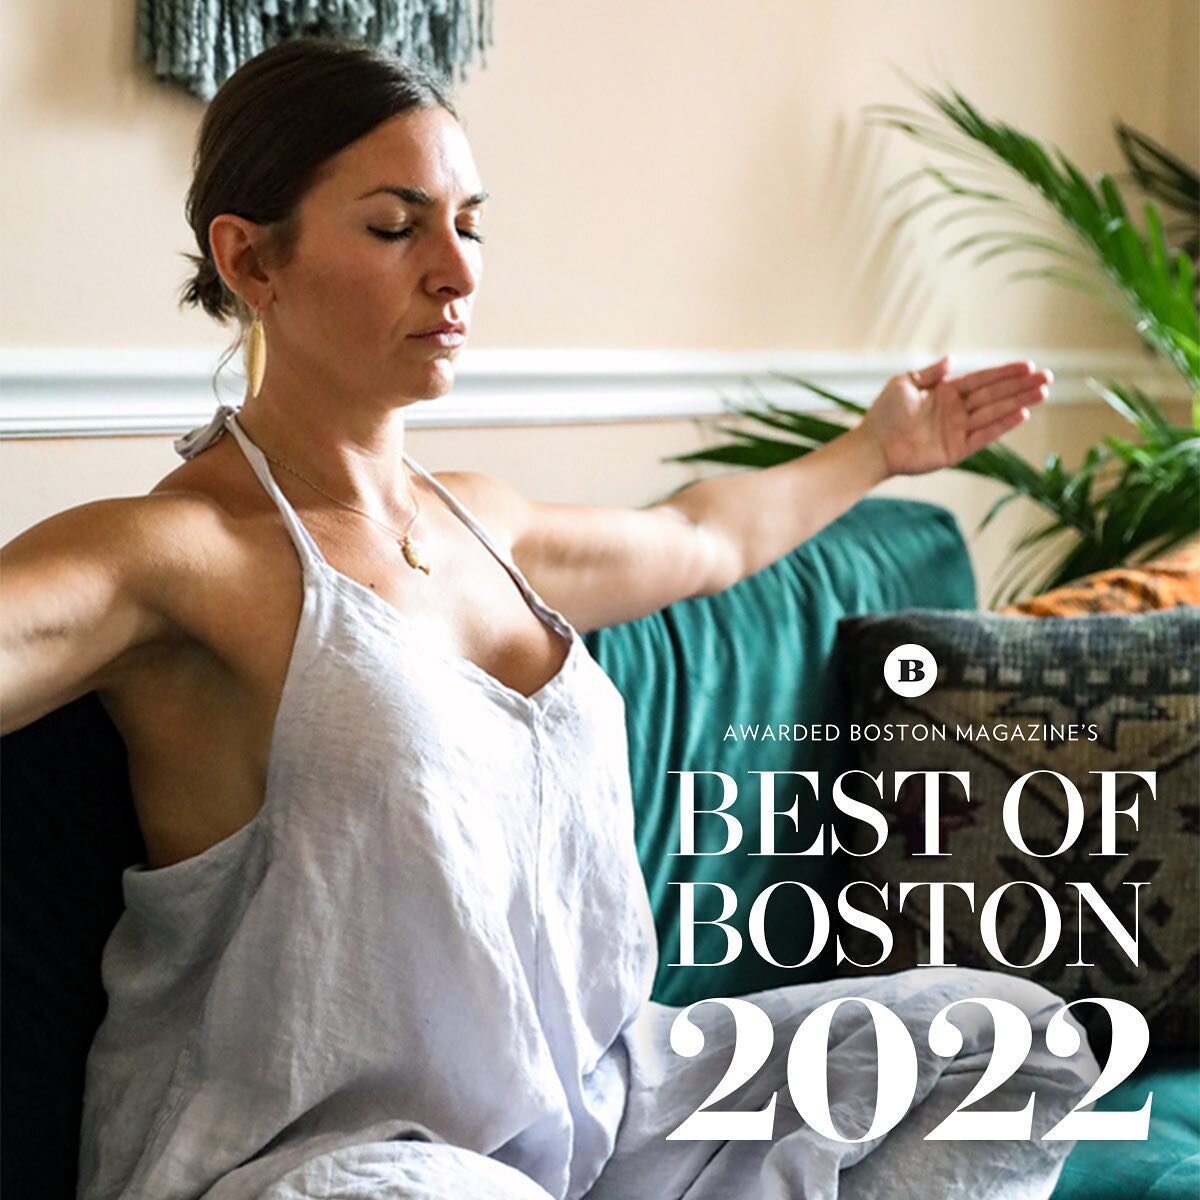 Best of Boston 2022
✨ Best Energy Healer ✨

First, I must say it is an honor to share Reiki each and every time.  I mean it wholeheartedly when I say I feel so lucky to be a witness to transformation and to be a part of anyone&rsquo;s healing process